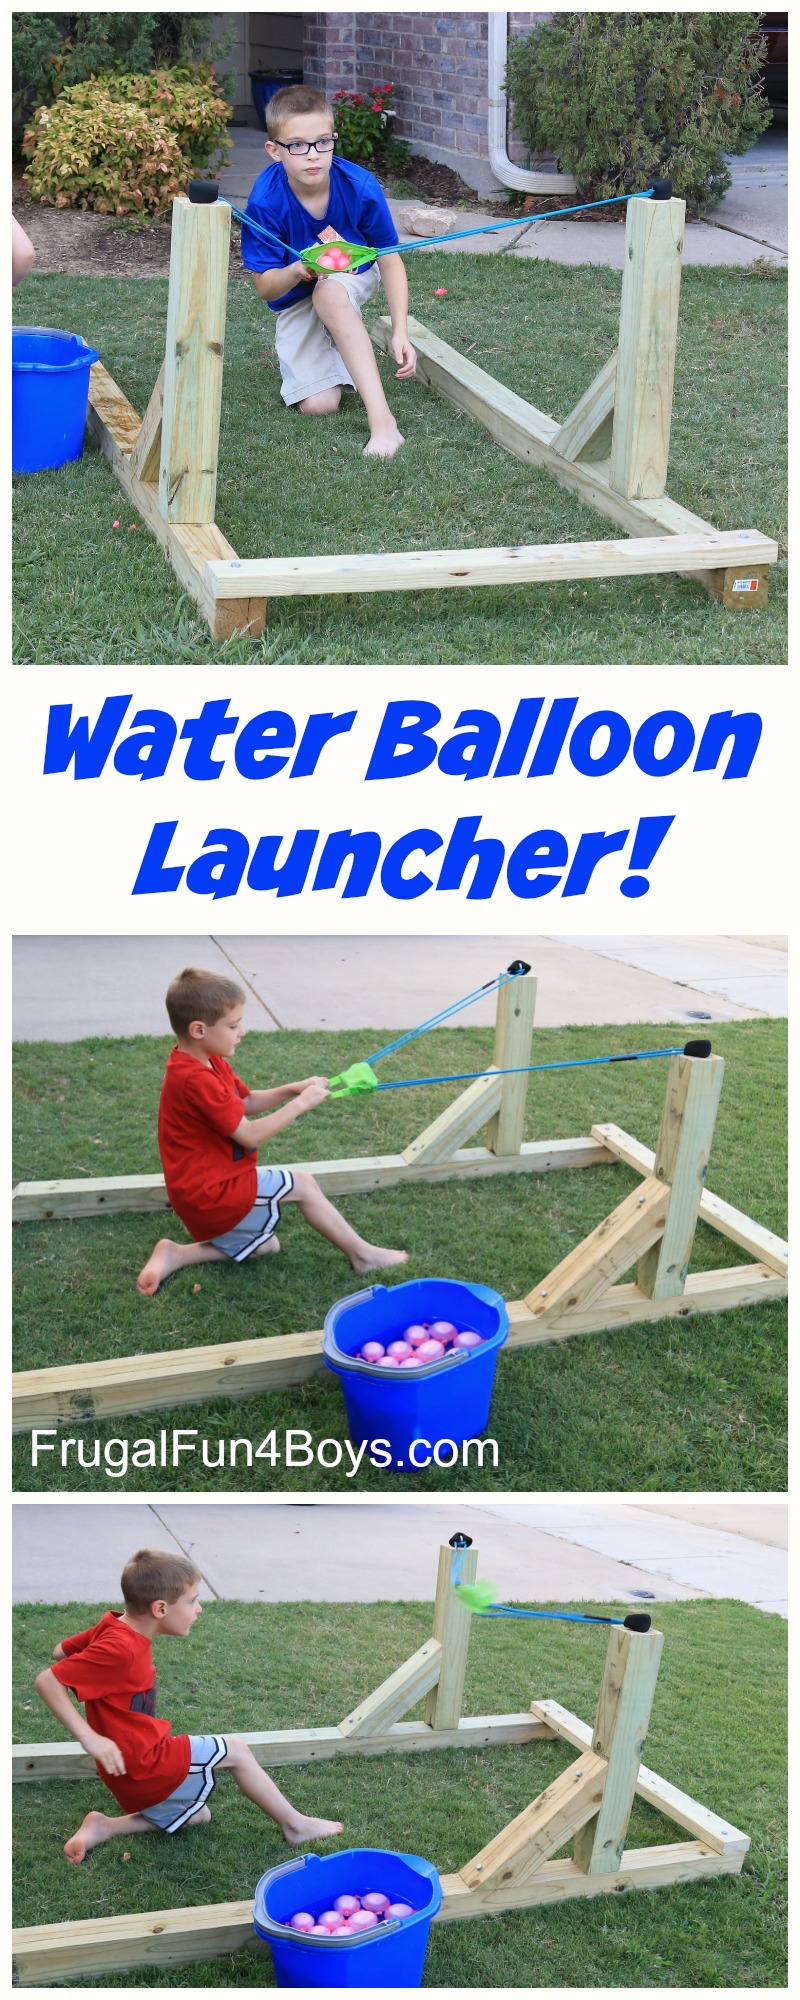 How to build an awesome water balloon launcher that the whole family will love!